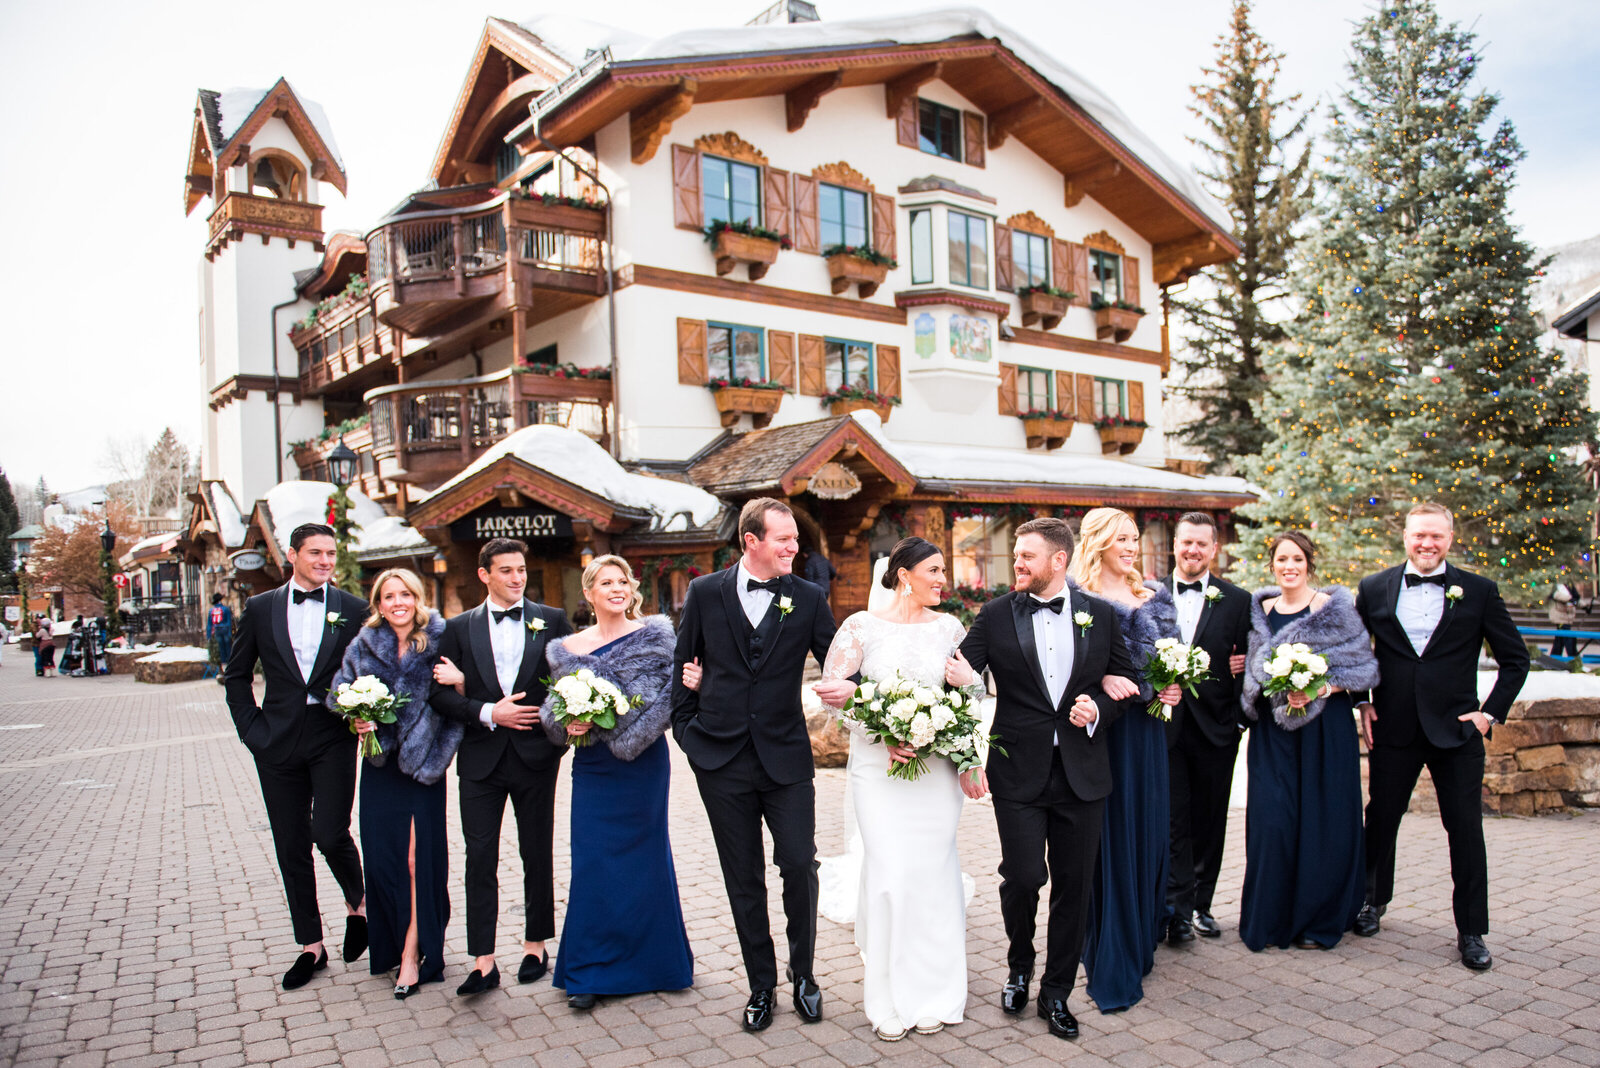 A bride and groom walk toward the camera with their wedding party in Vail, Colorado.